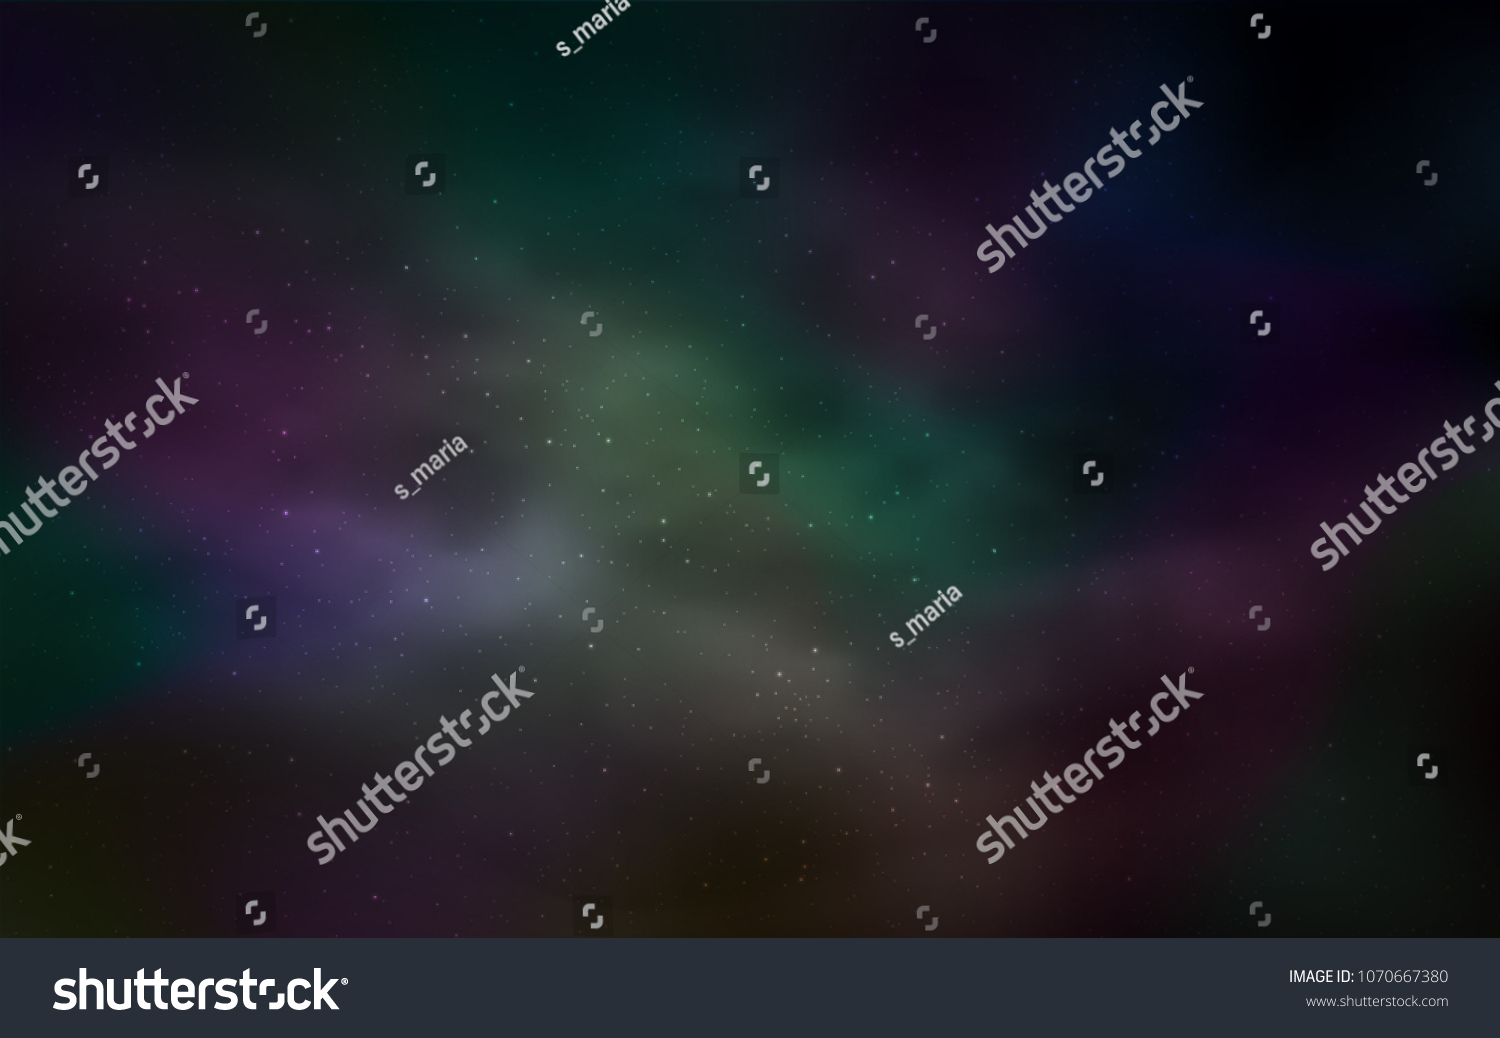 Dark Green vector texture with milky way stars. Shining illustration with sky stars on abstract template. Best design for your ad, poster, banner. #1070667380